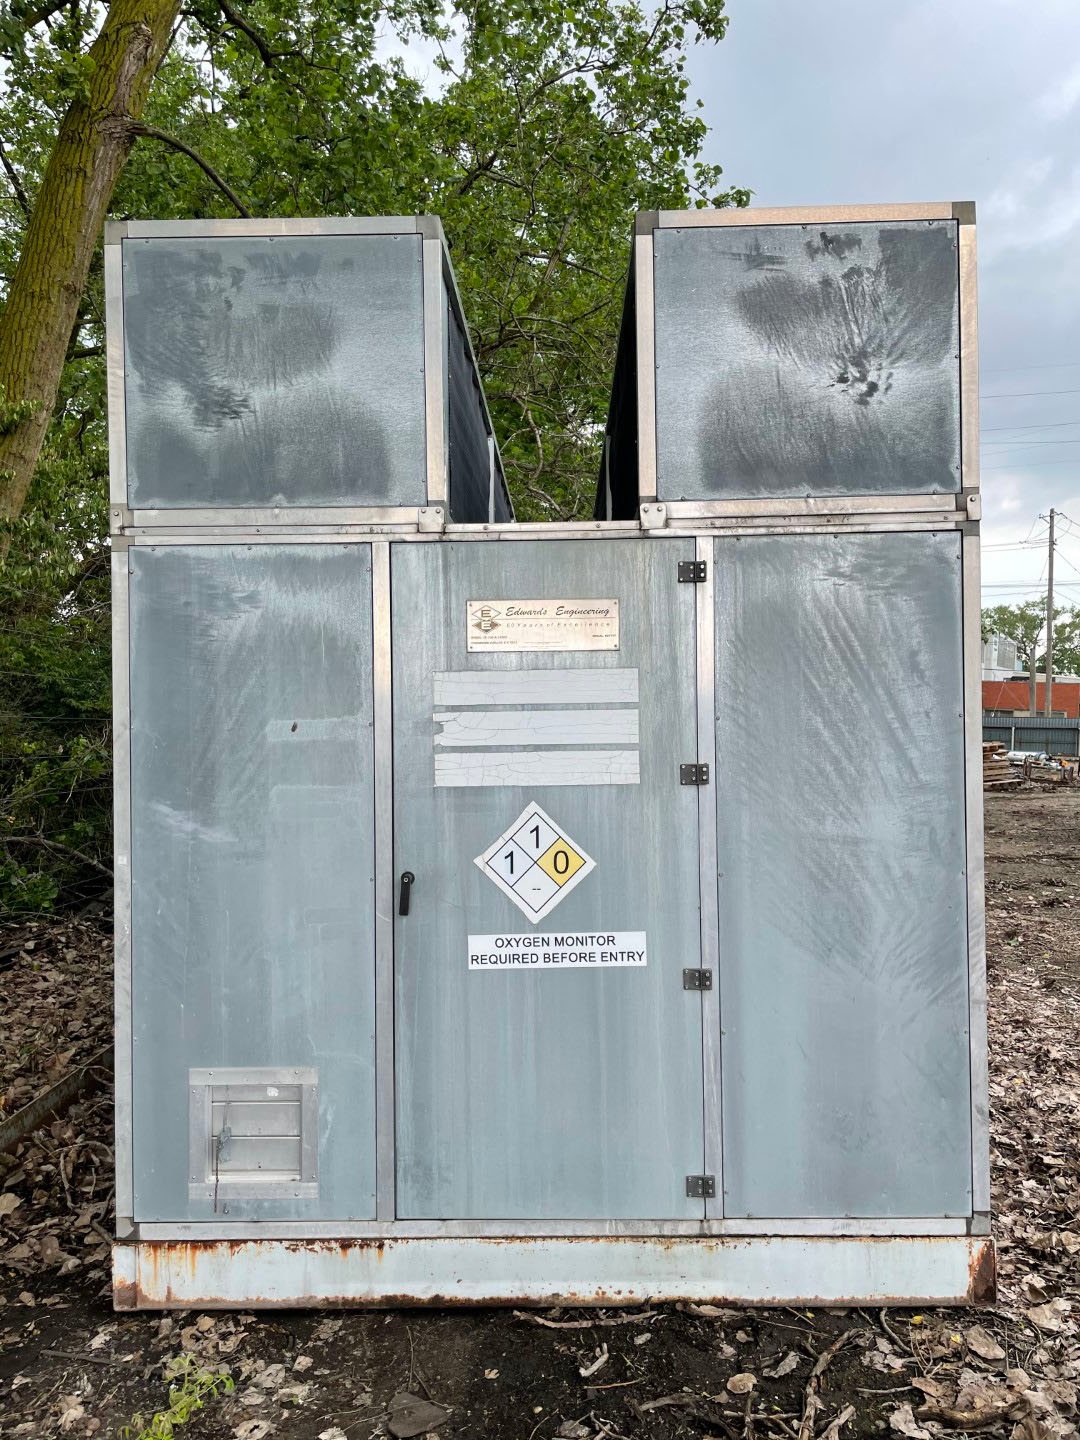 195 Ton Edwards Chiller, Model CE-210-A- 14ZB3, Air Cooled